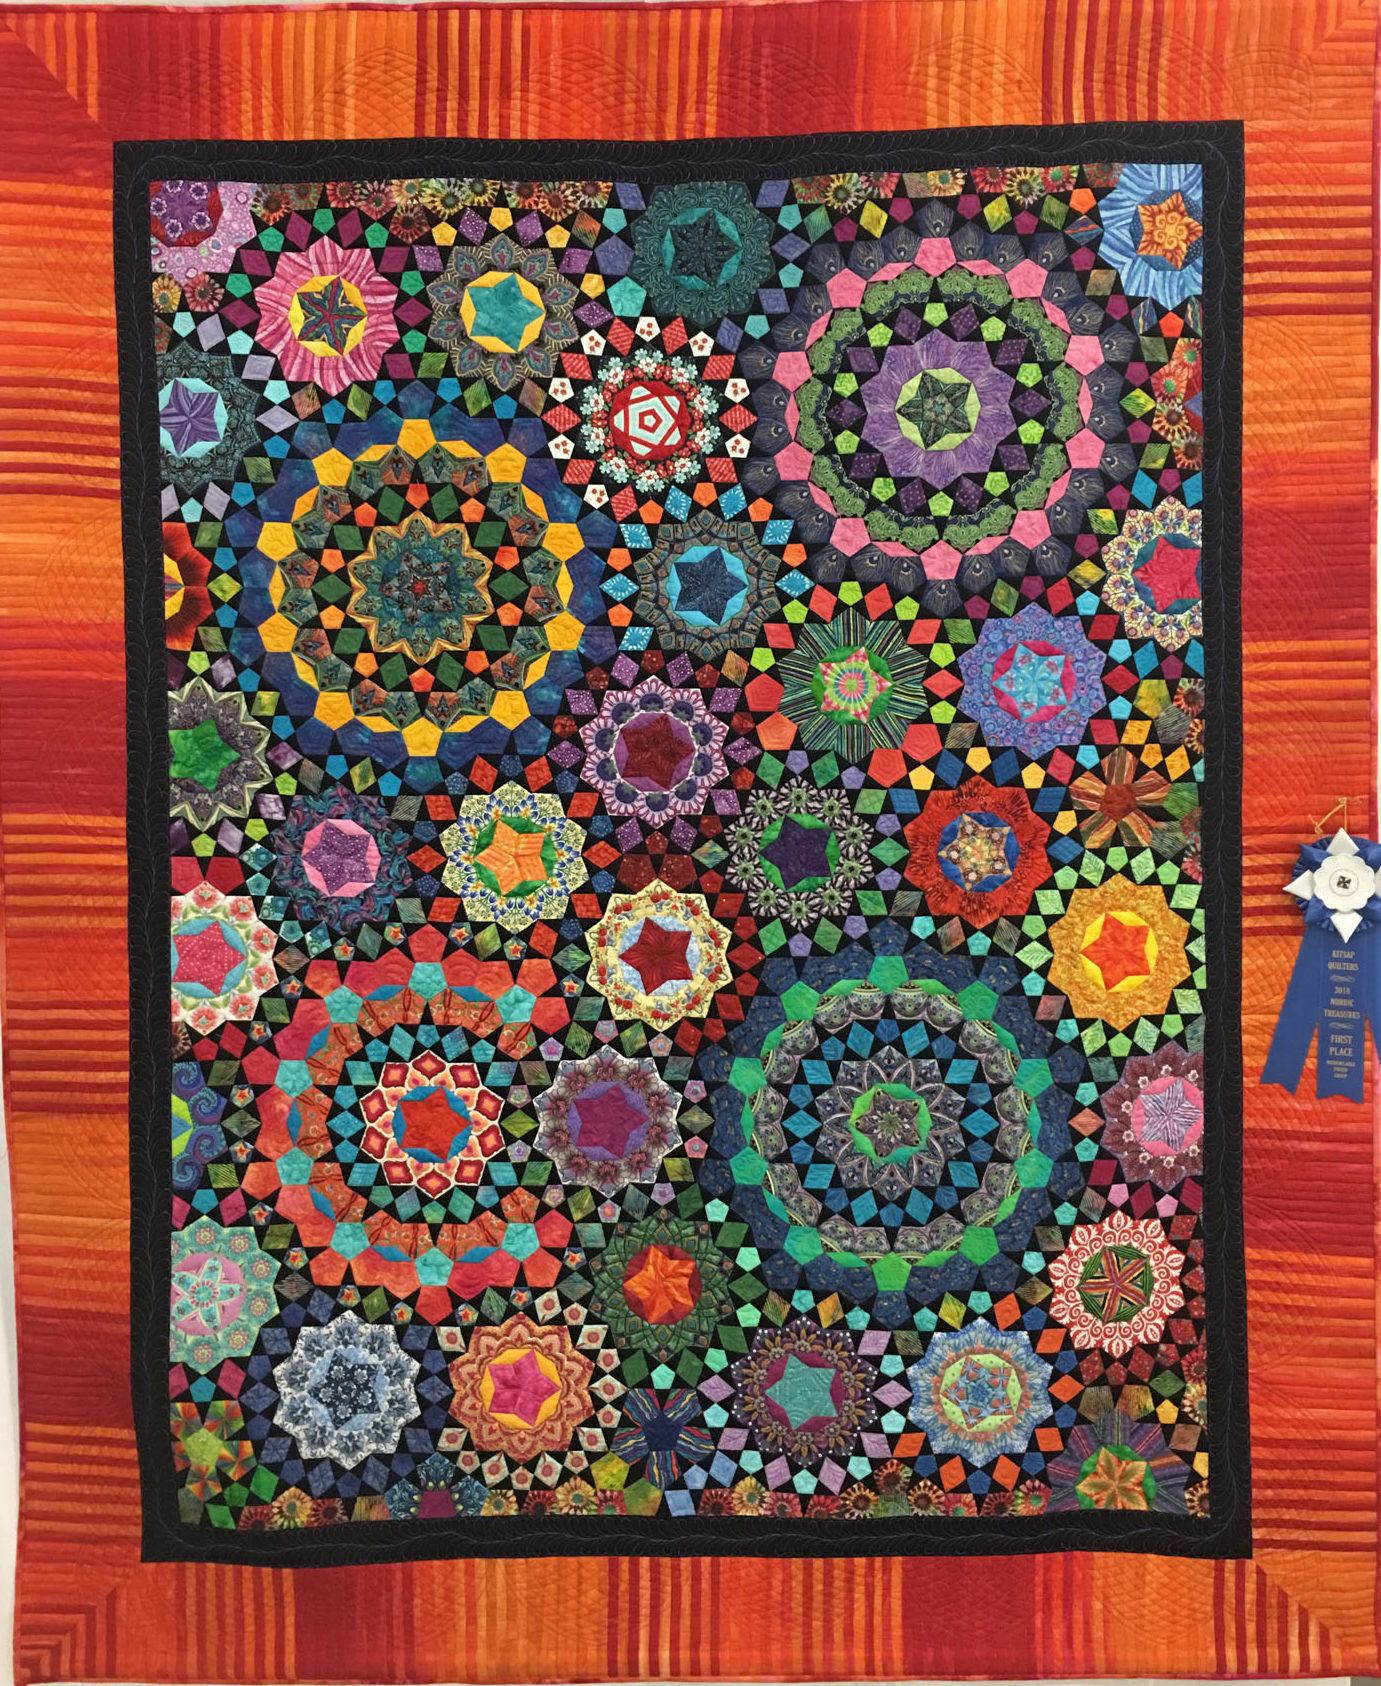 416 “A Passion for Color” made by Ann Trujillo, quilted by Celeste Alexander, 1st Place Med/Lg Group, 2018 Kitsap Quilt Show